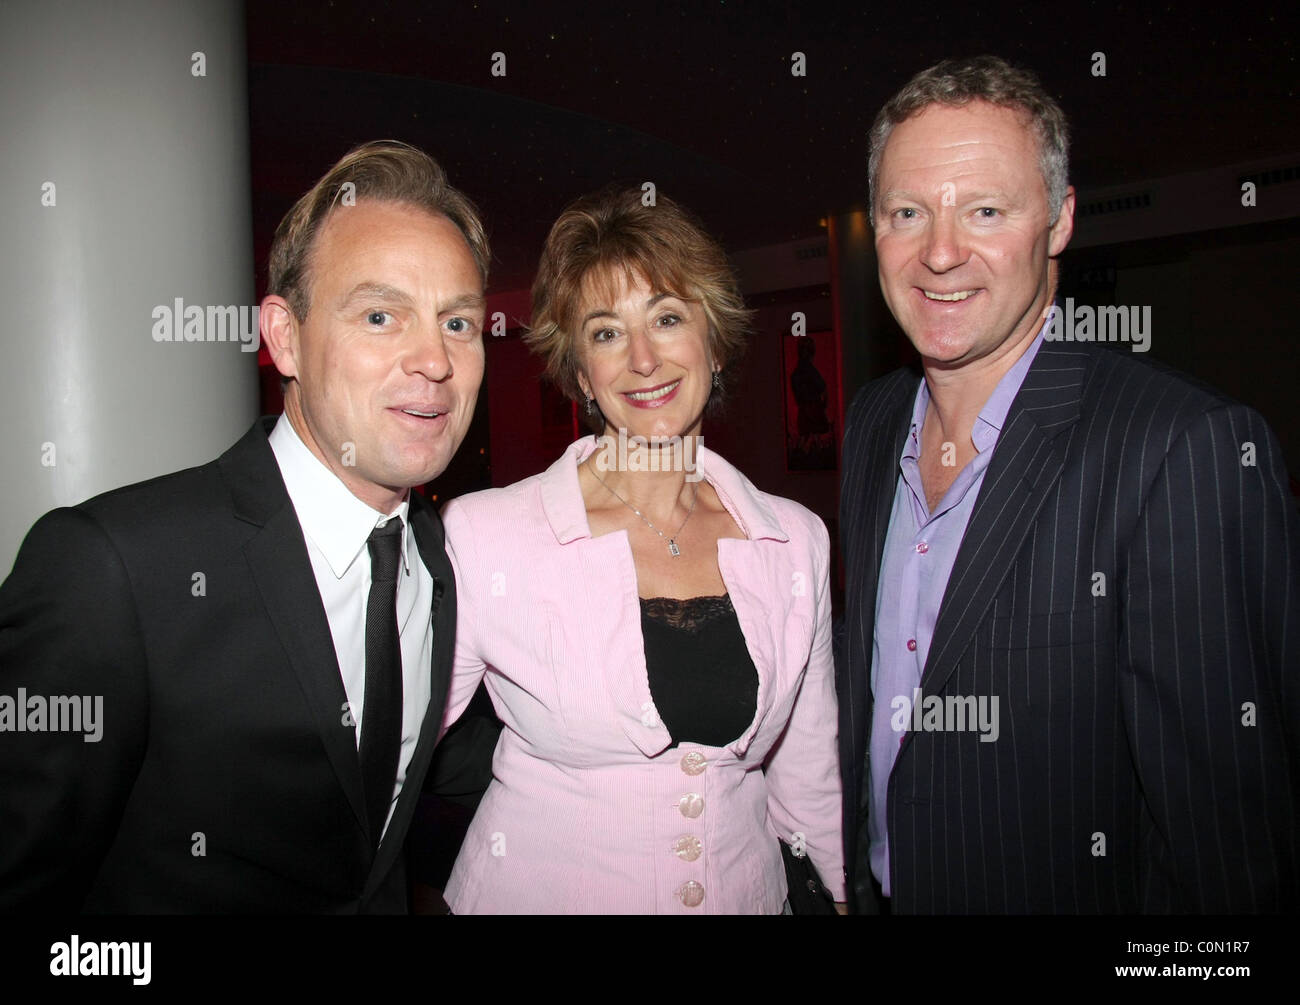 Jason Donovan, Maureen Lipman and Rory Bremner attend the Kathy Lette Book Launch 'To Love Honour and Betray' held at the Stock Photo